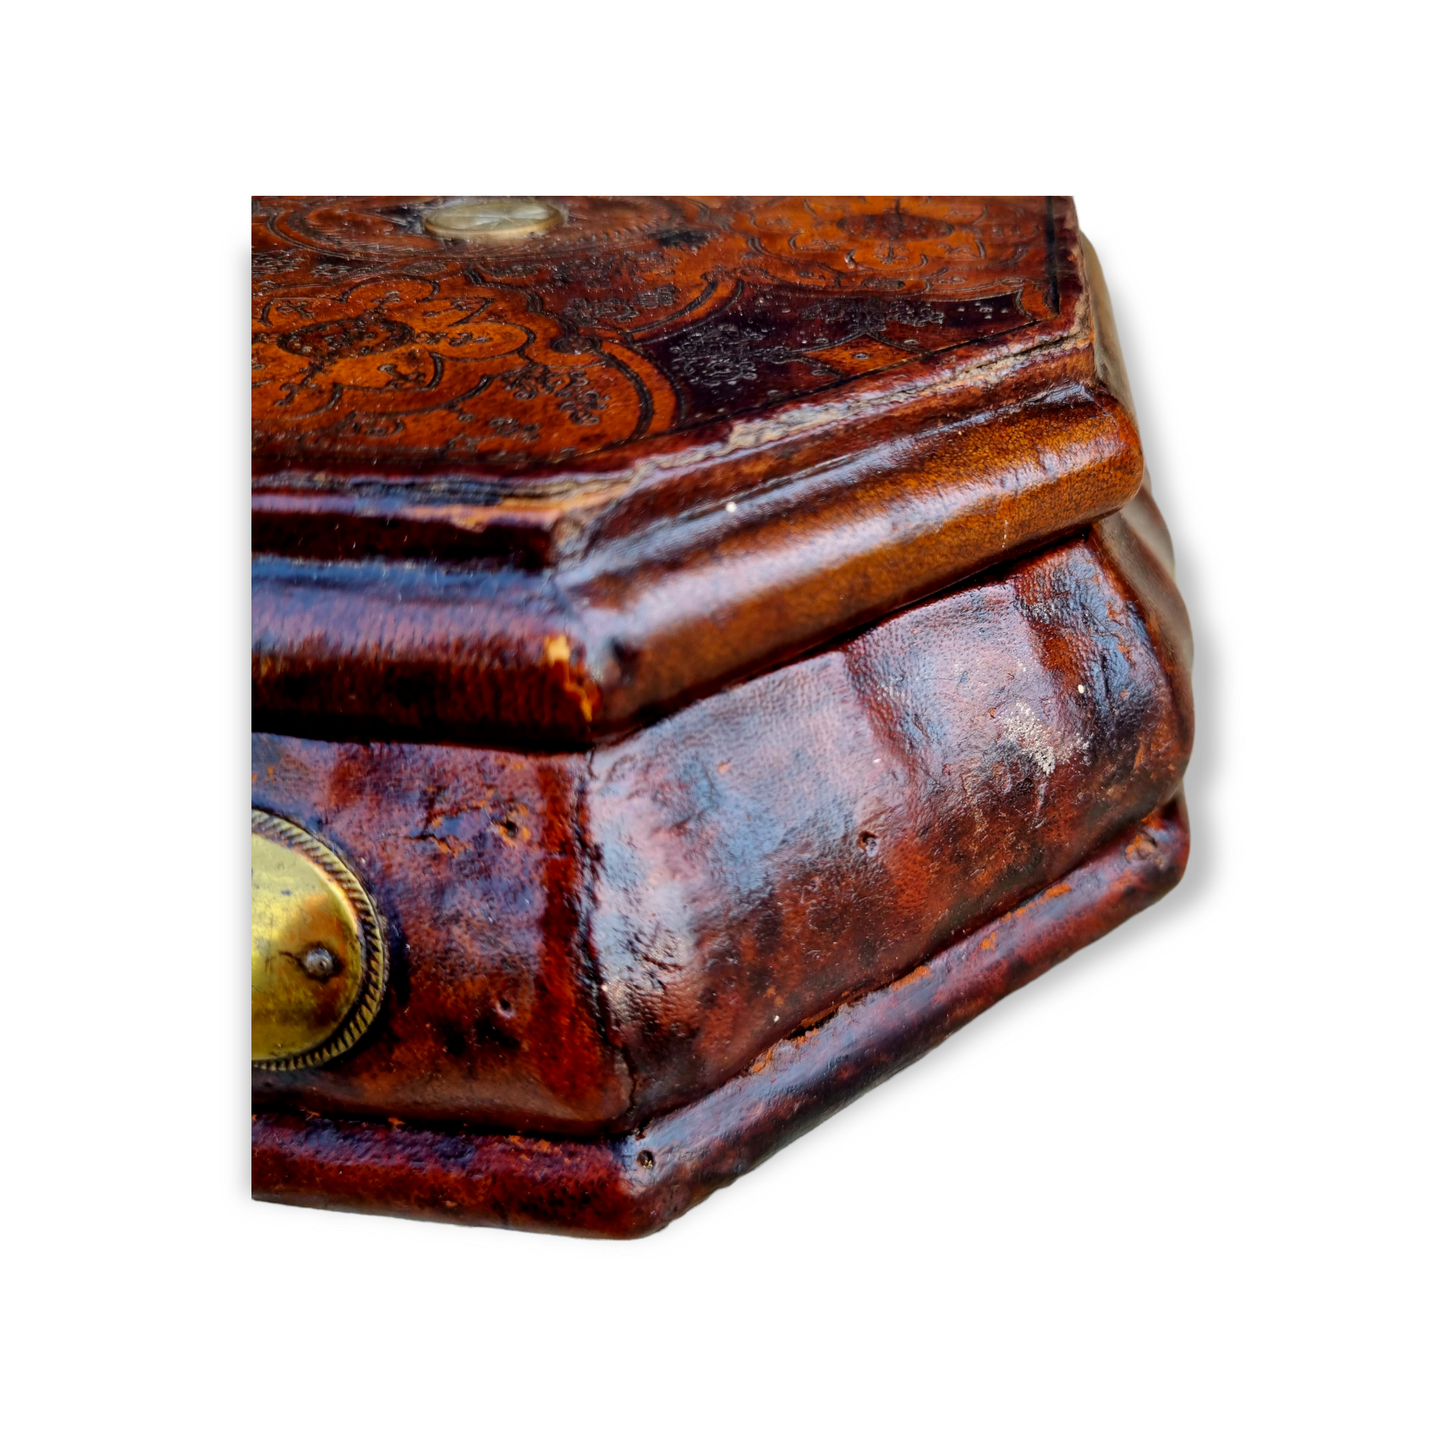 Mid 18th Century Antique Tooled Leather Box / Travelling Case With A Rare Inlaid Compass to the Lid